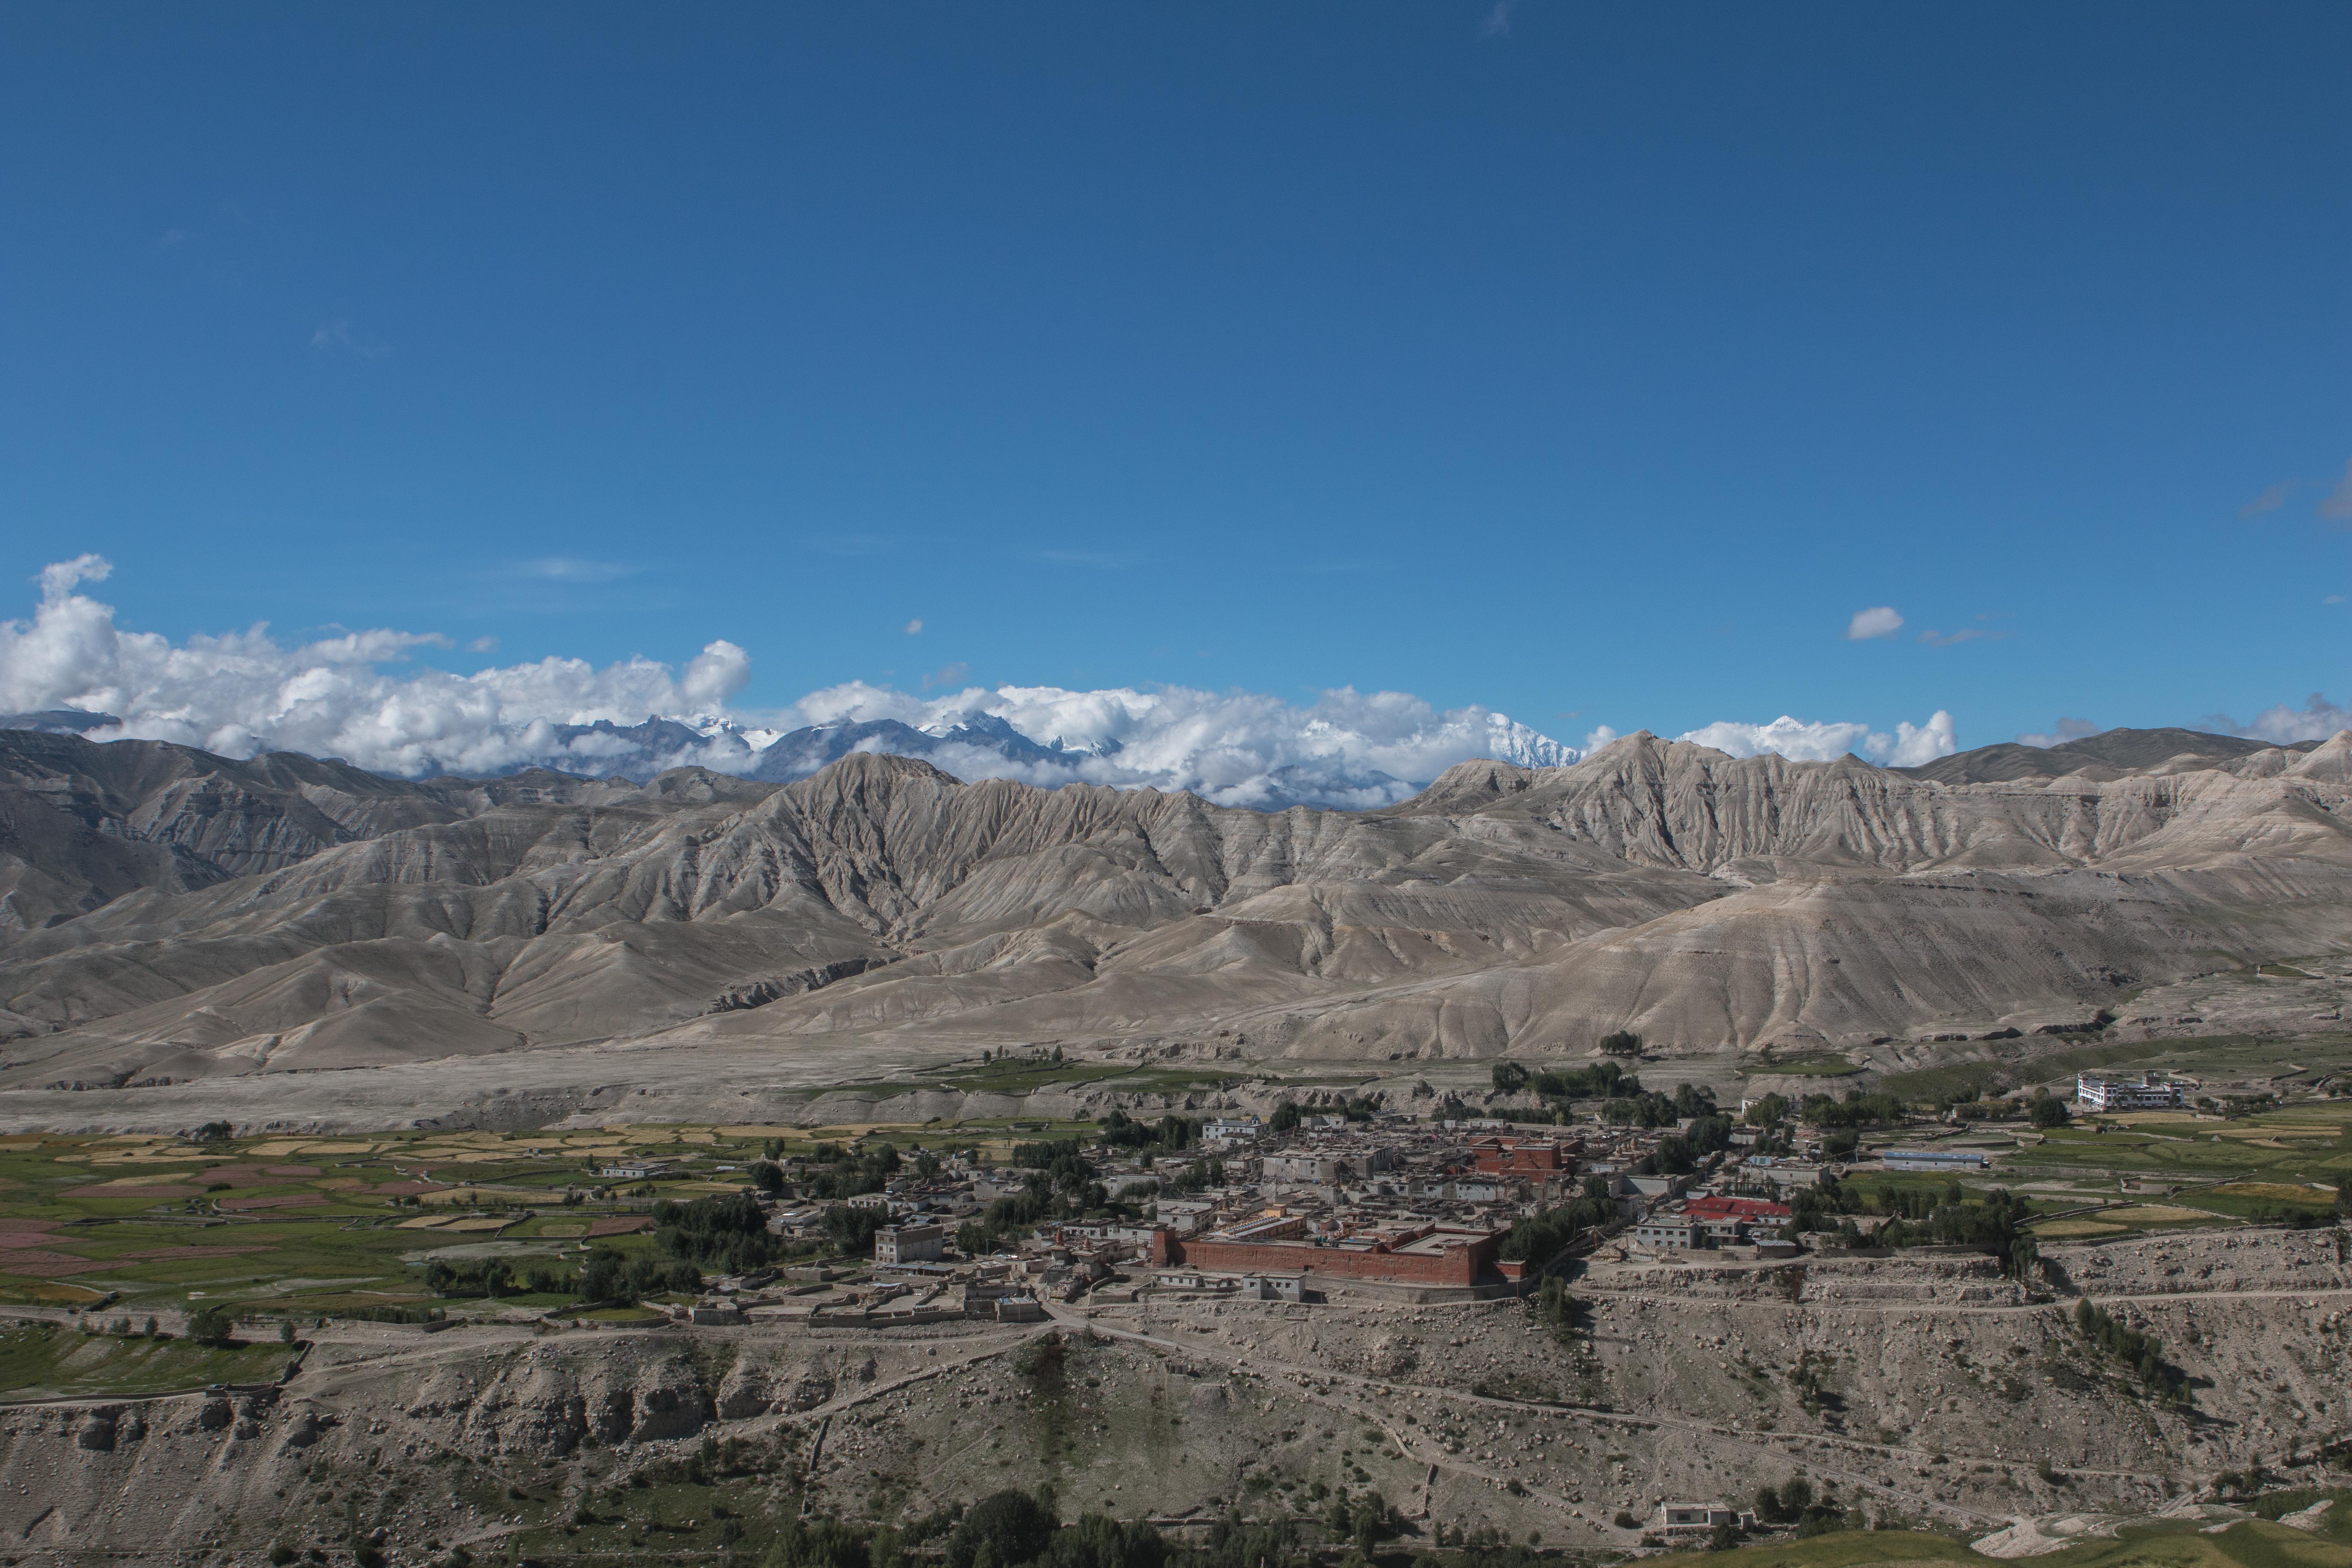 The Forbidden Kingdom of Lo-Manthang